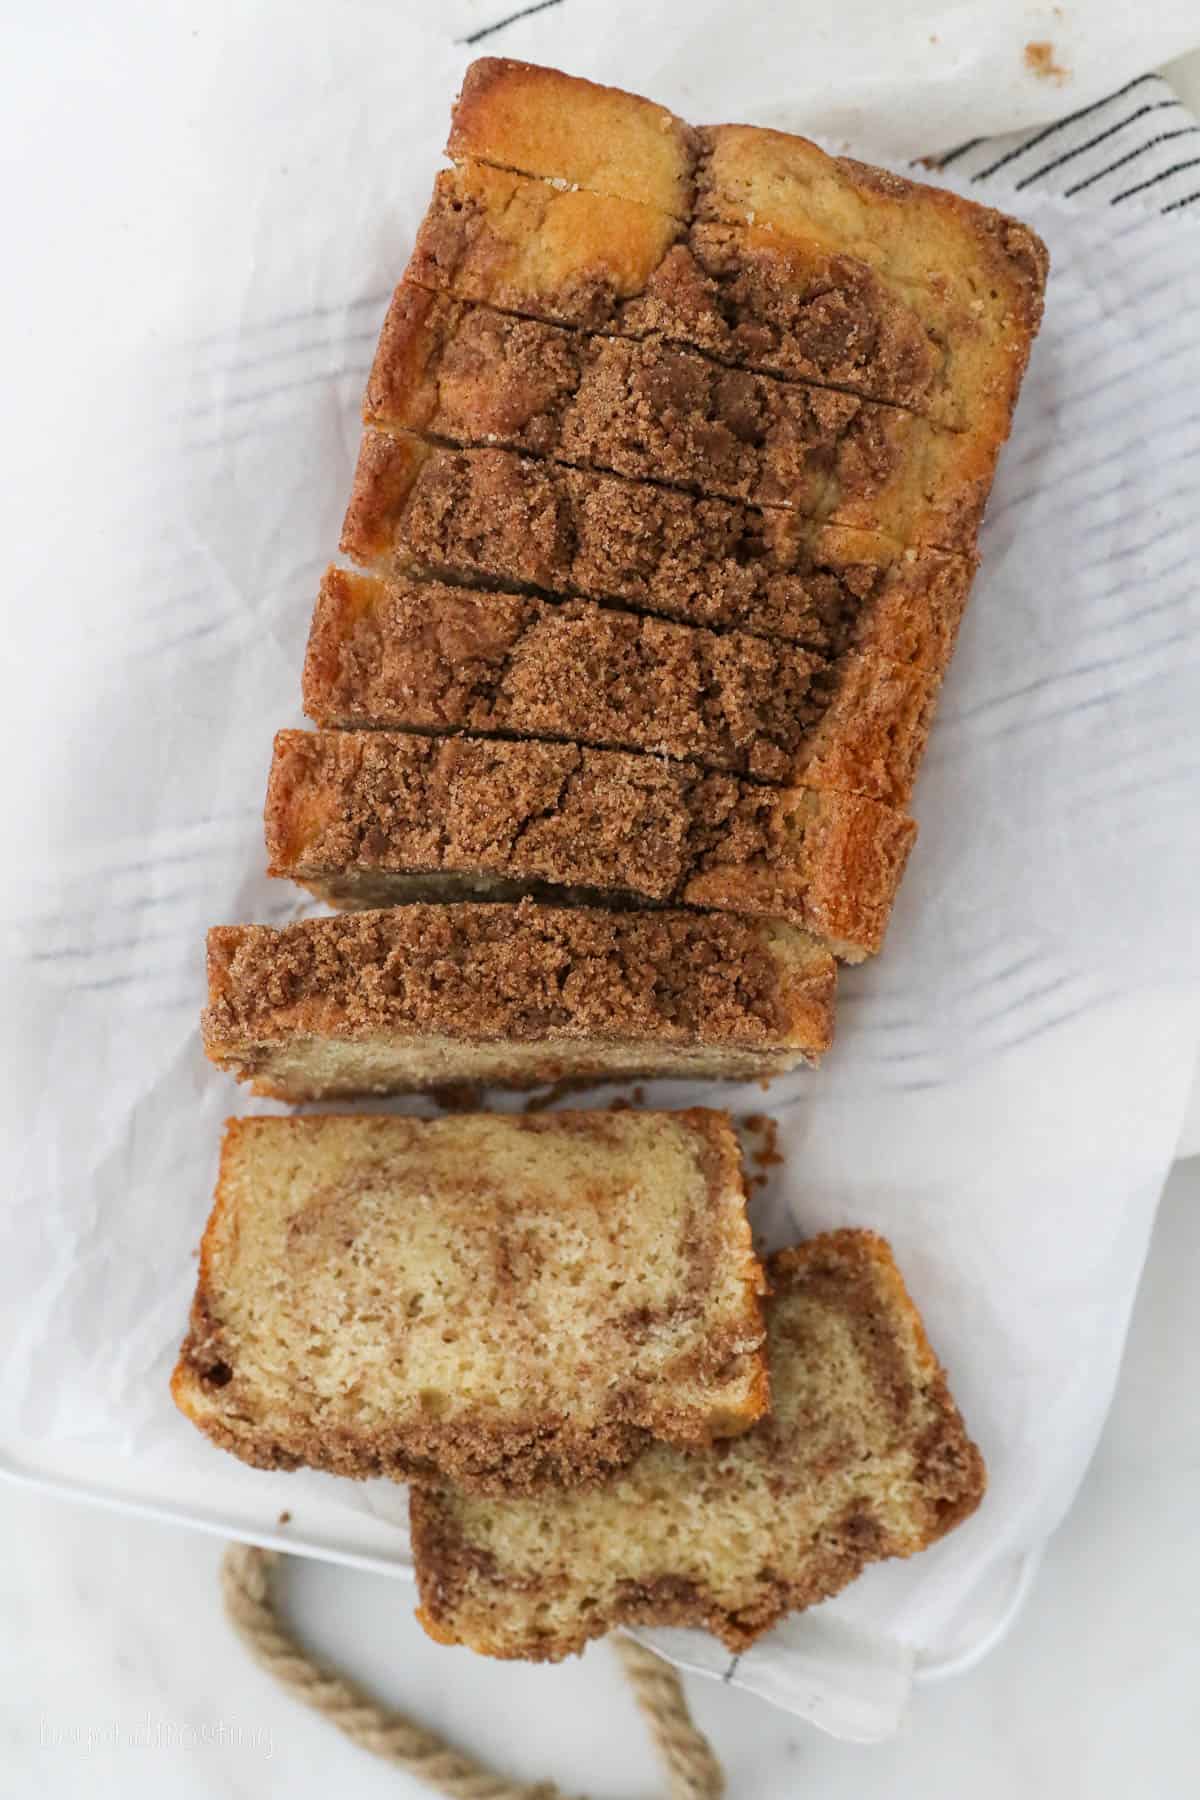 Overhead view of a loaf of cinnamon sugar bread cut into slices.